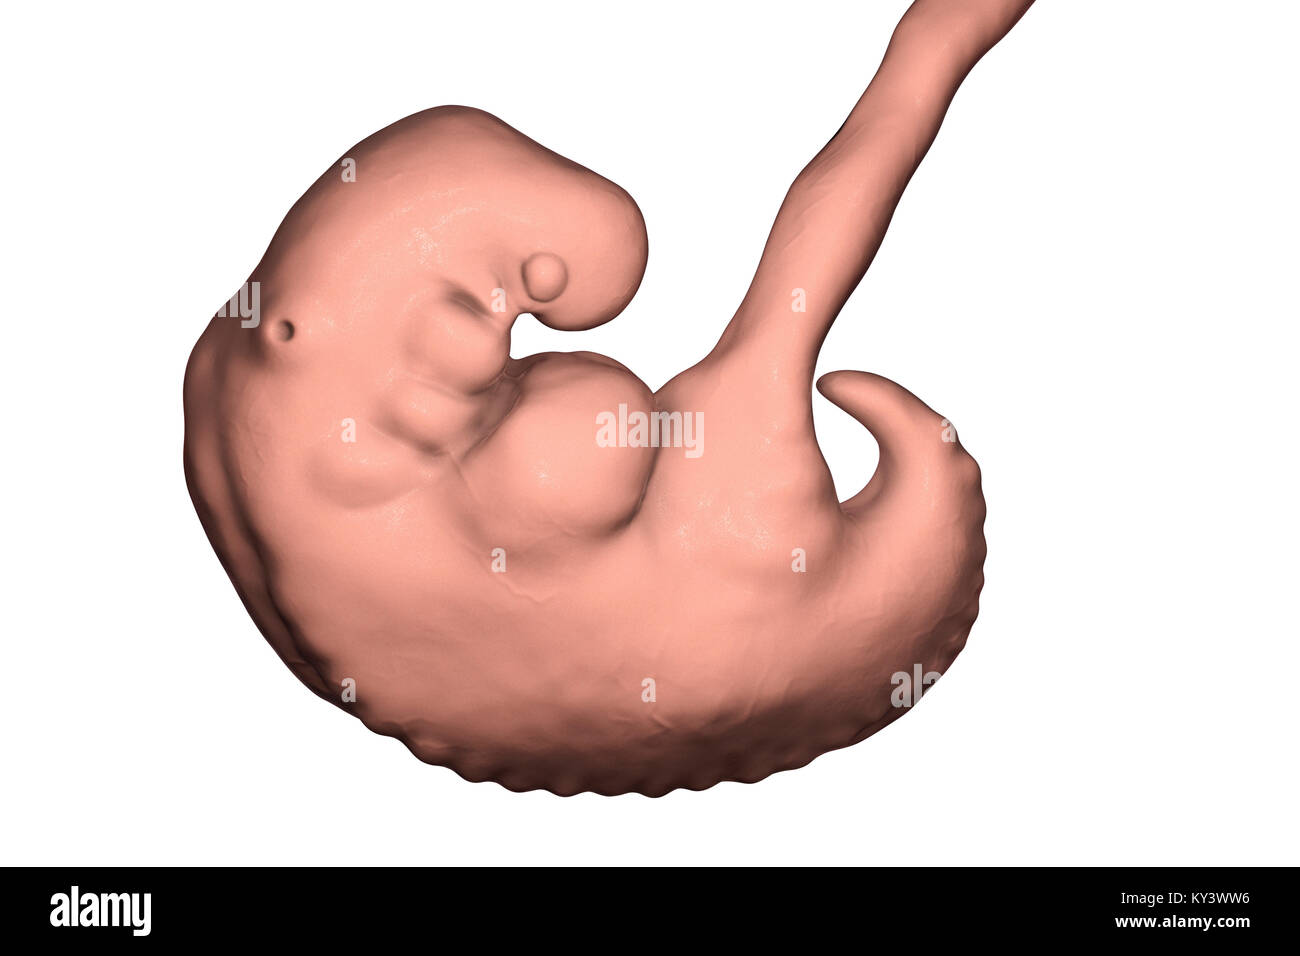 Embryo during the middle part of the 4th week, computer illustration. Stock Photo